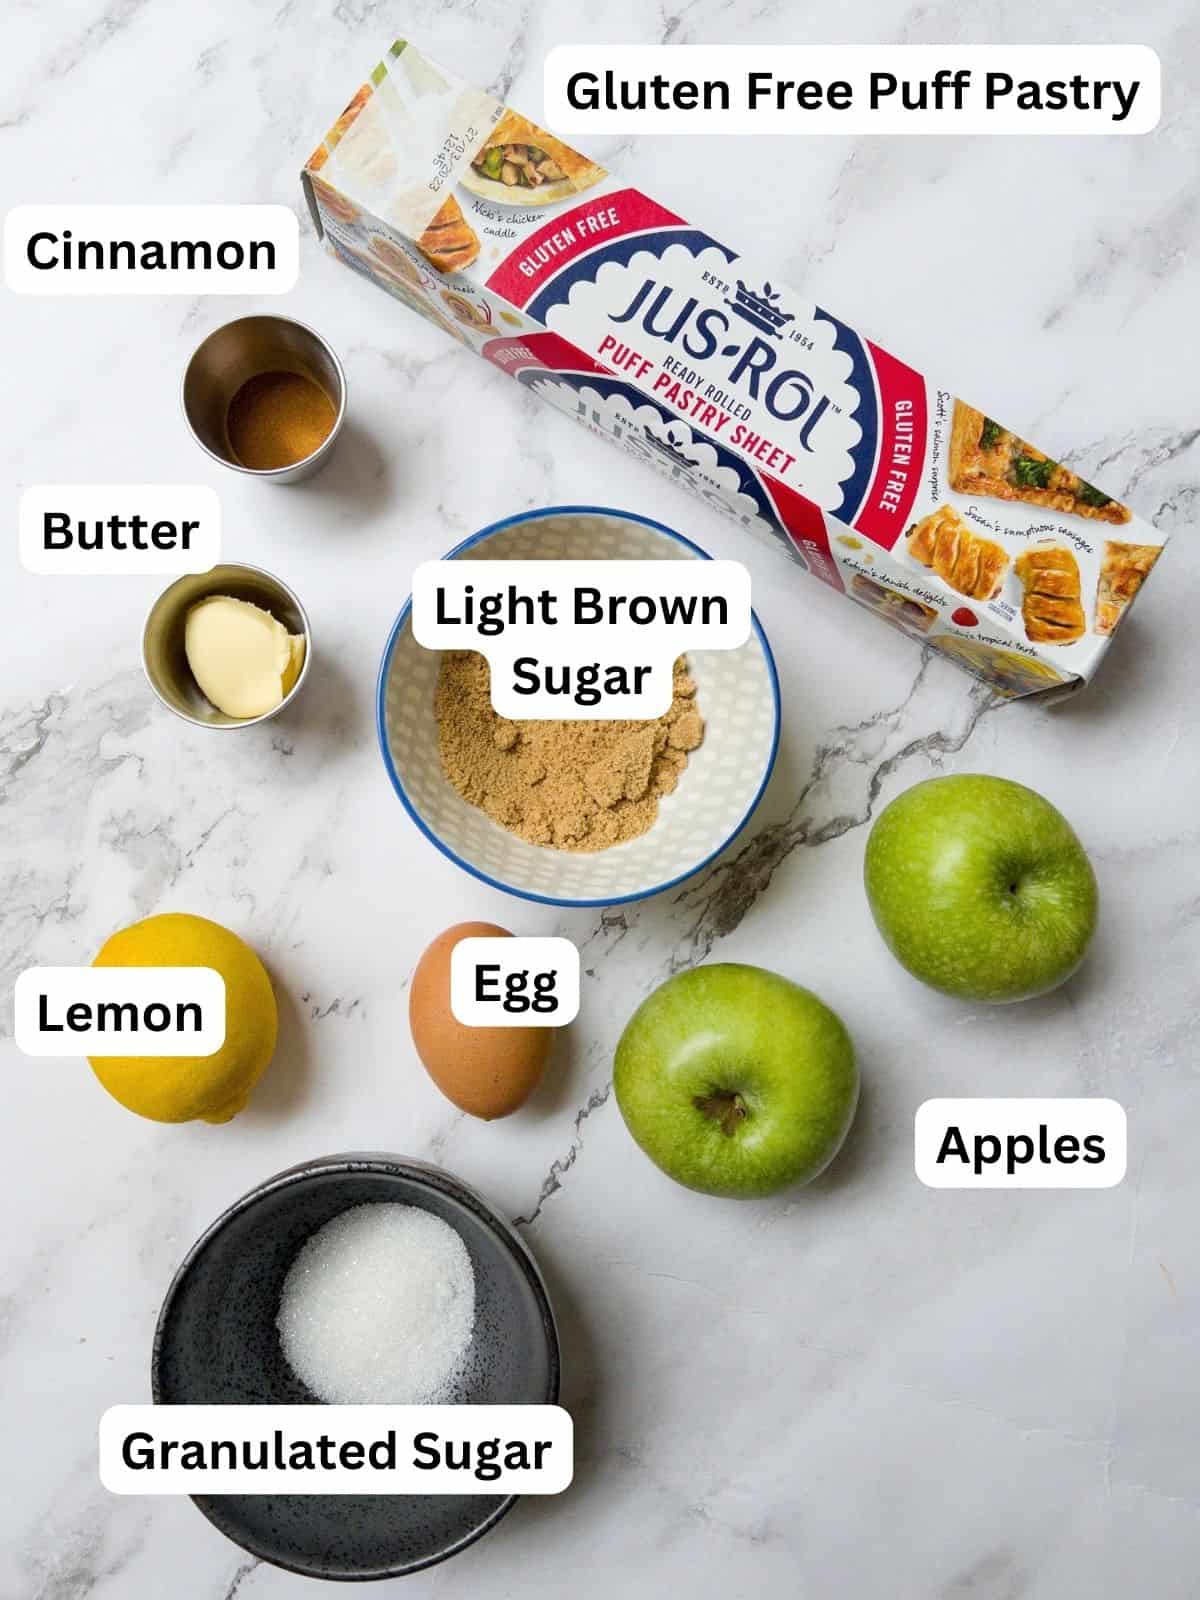 Ingredients laid out for gluten free apple turnovers.